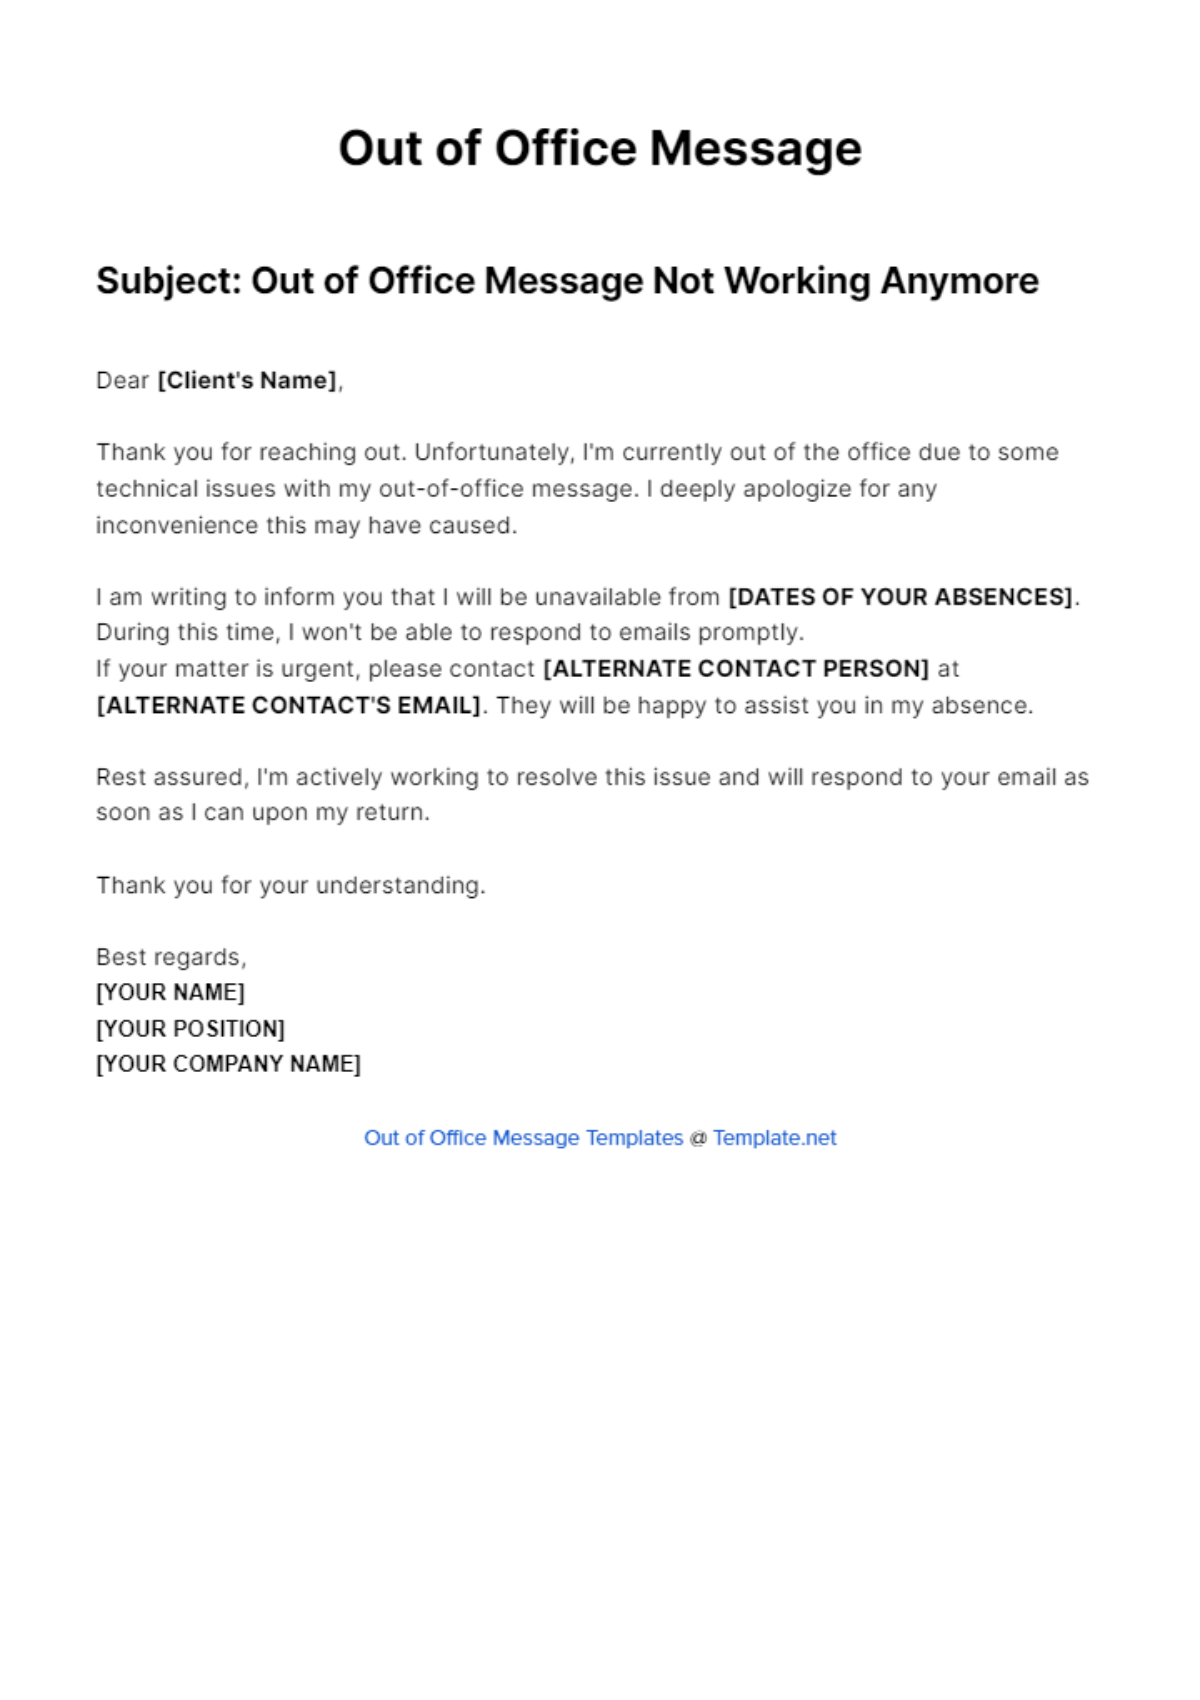 Out Of Office Message Not Working Anymore Template